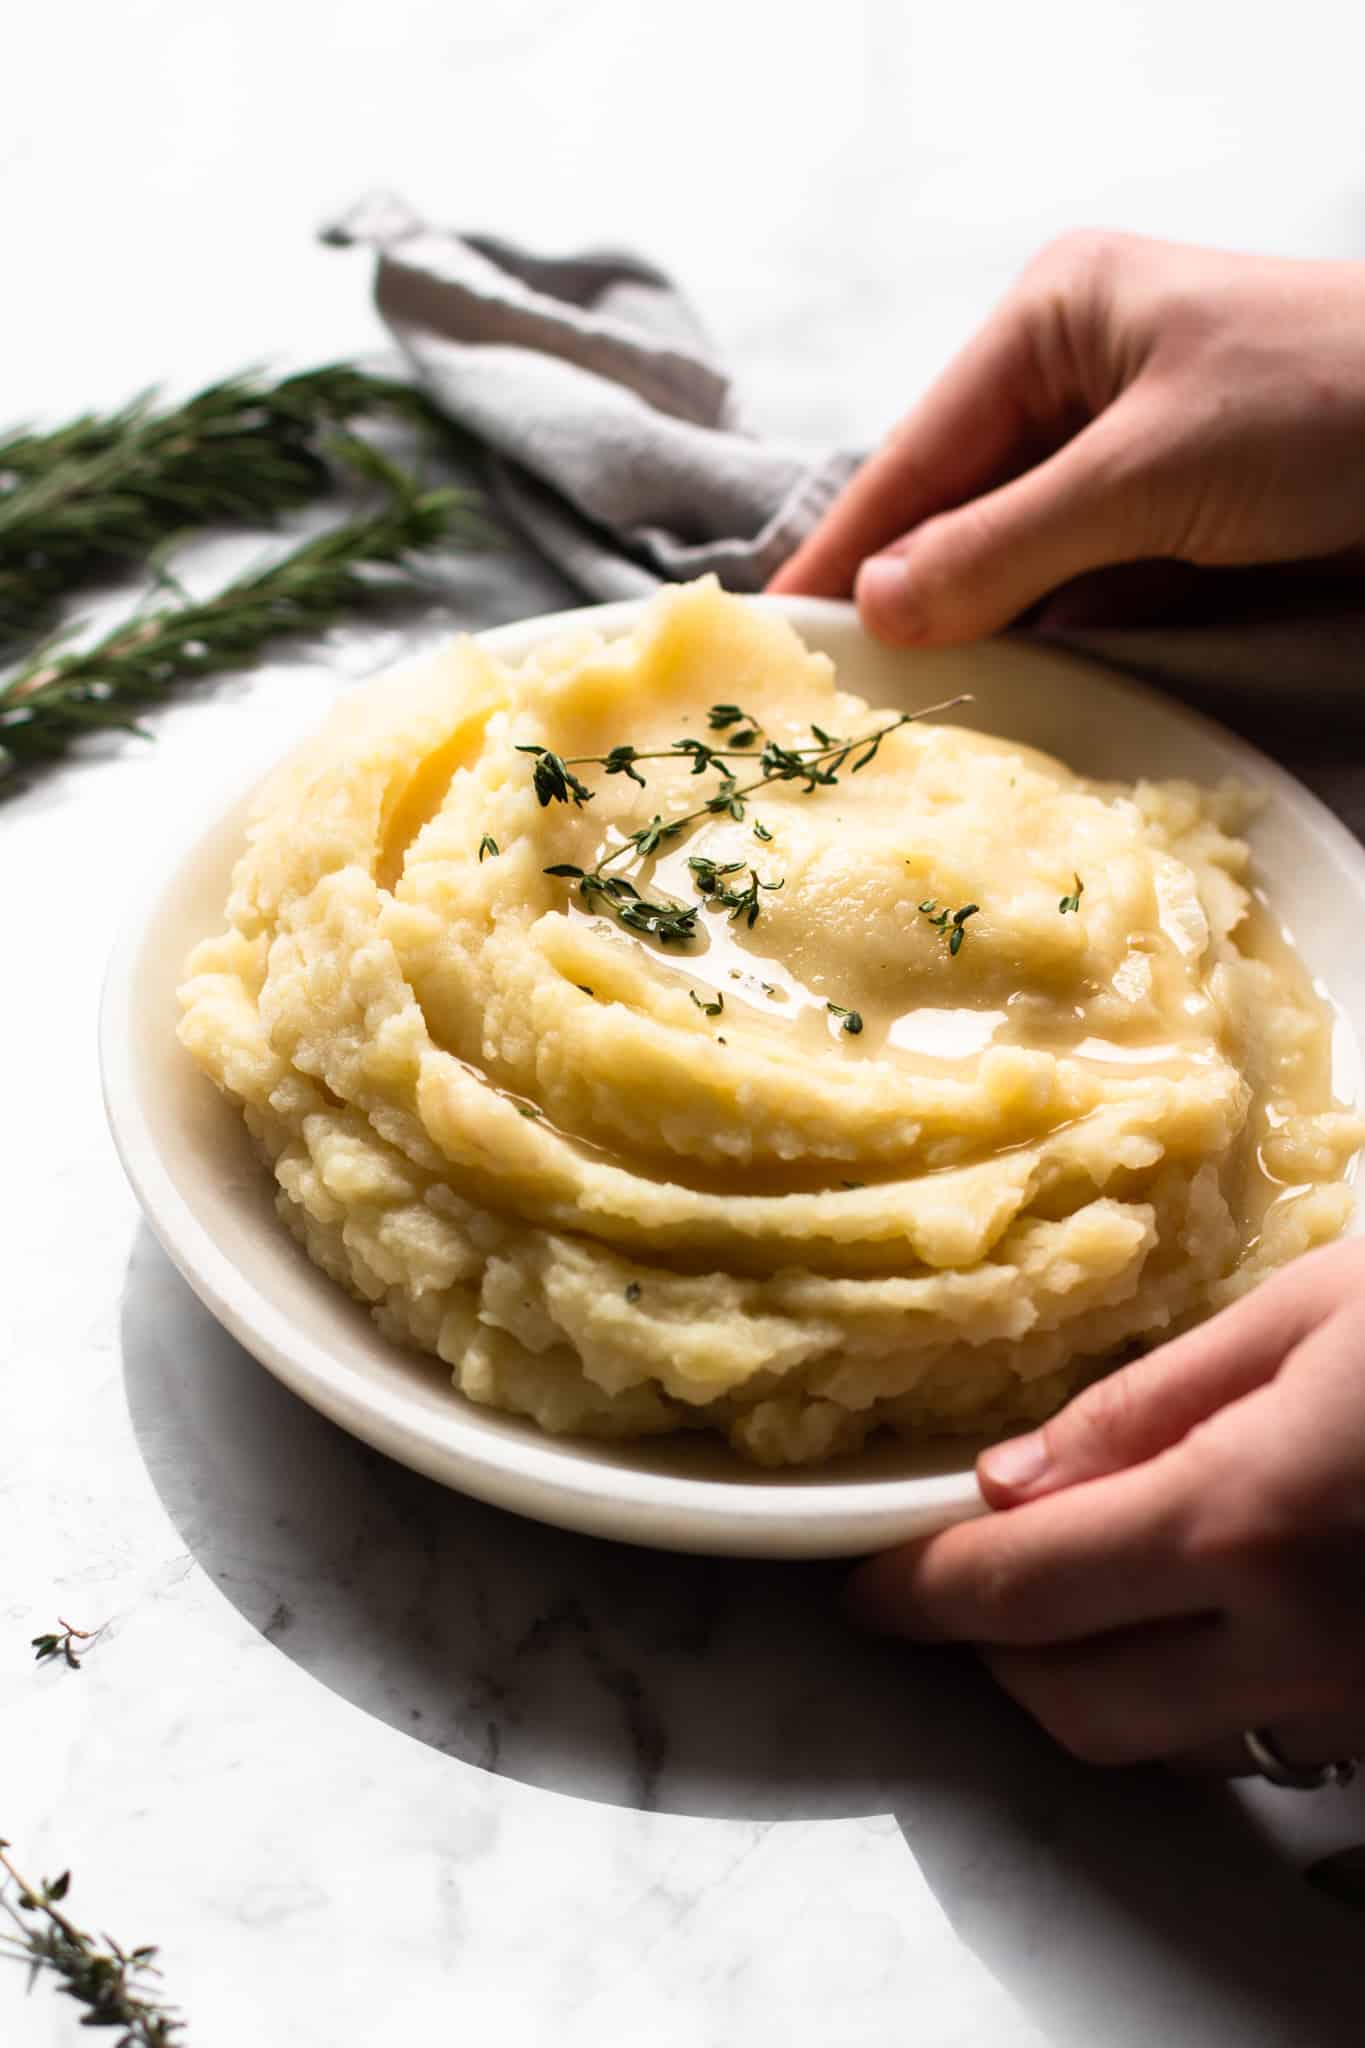 hands holding a plate of mashed potatoes